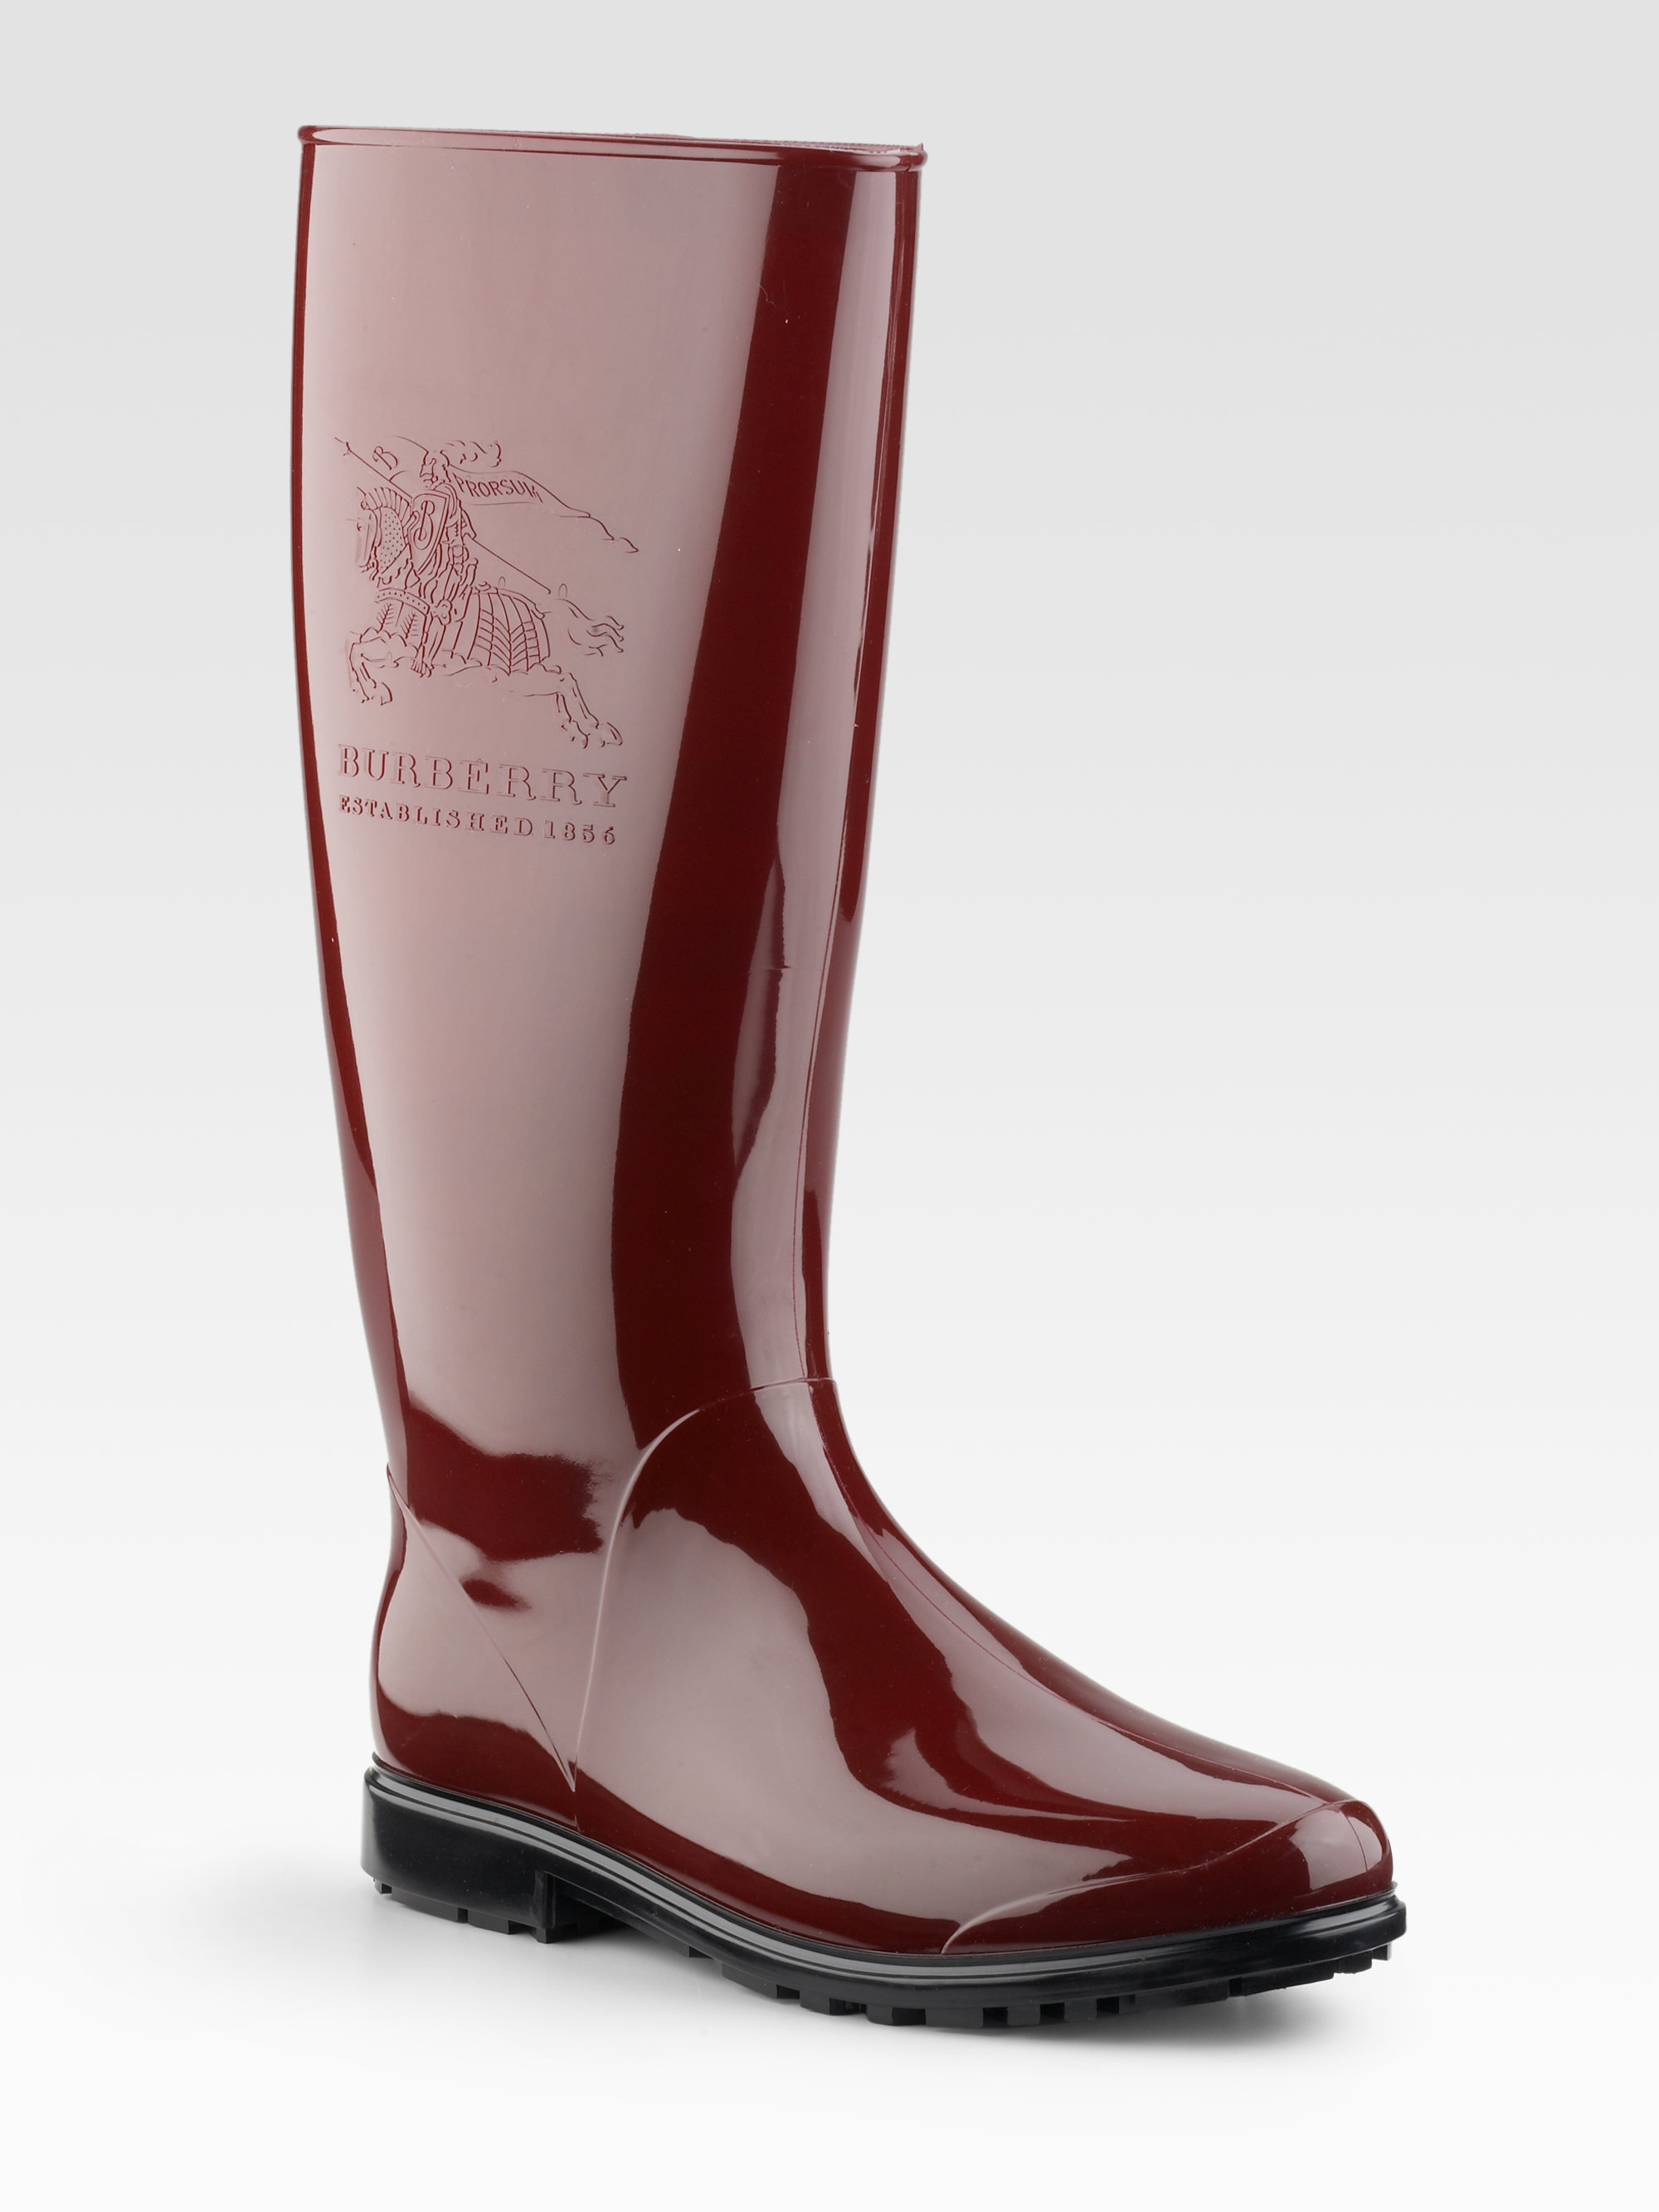 Burberry Rain Boots On Sale For Women 